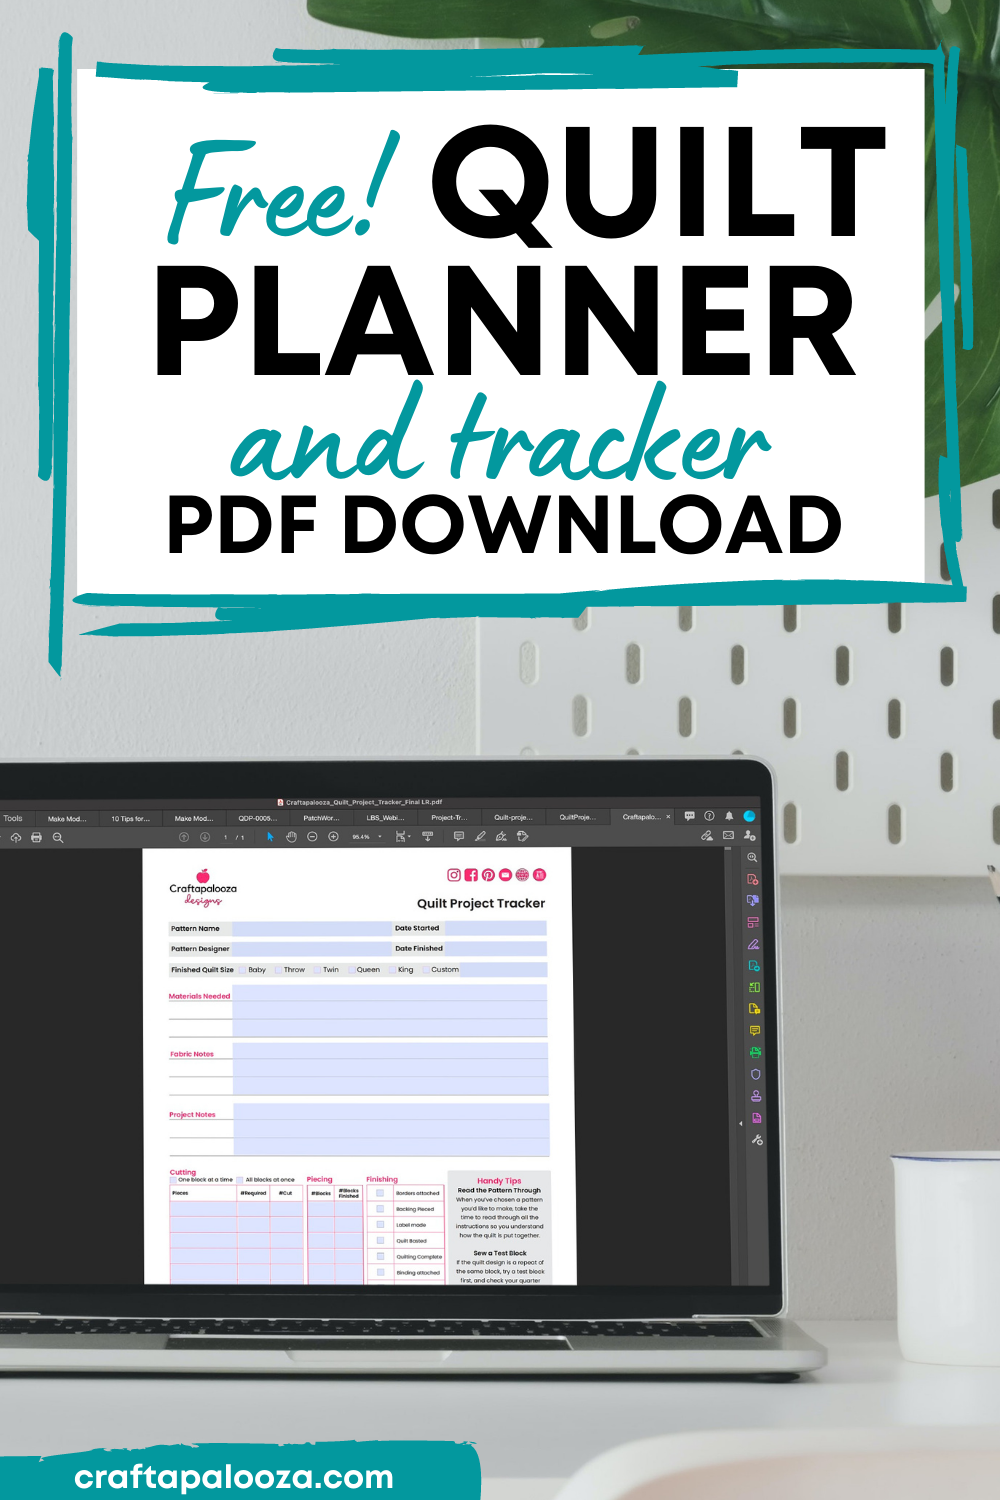 craftapalooza designs - quilt planner and trackers pdf download